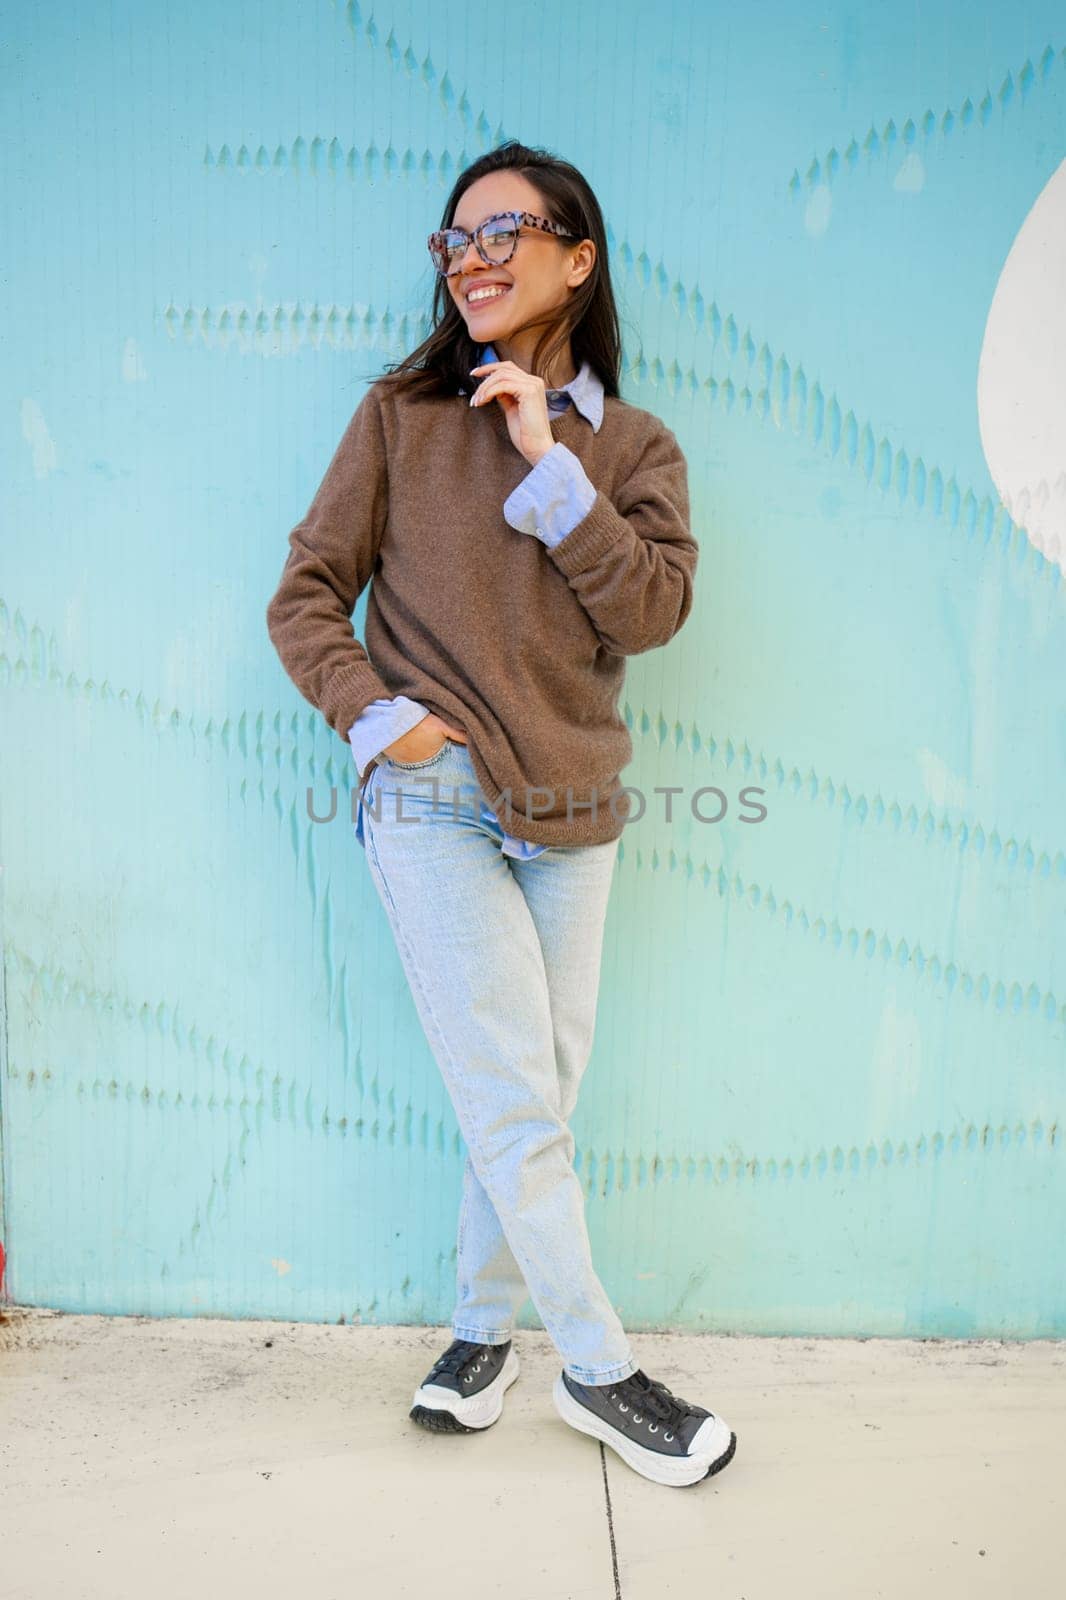 Happy woman in glasses outdoor on blue color background. Positive people concept. Smiling girl looking away, hands in pocket, dressed sweater and jeans. Vertical full length